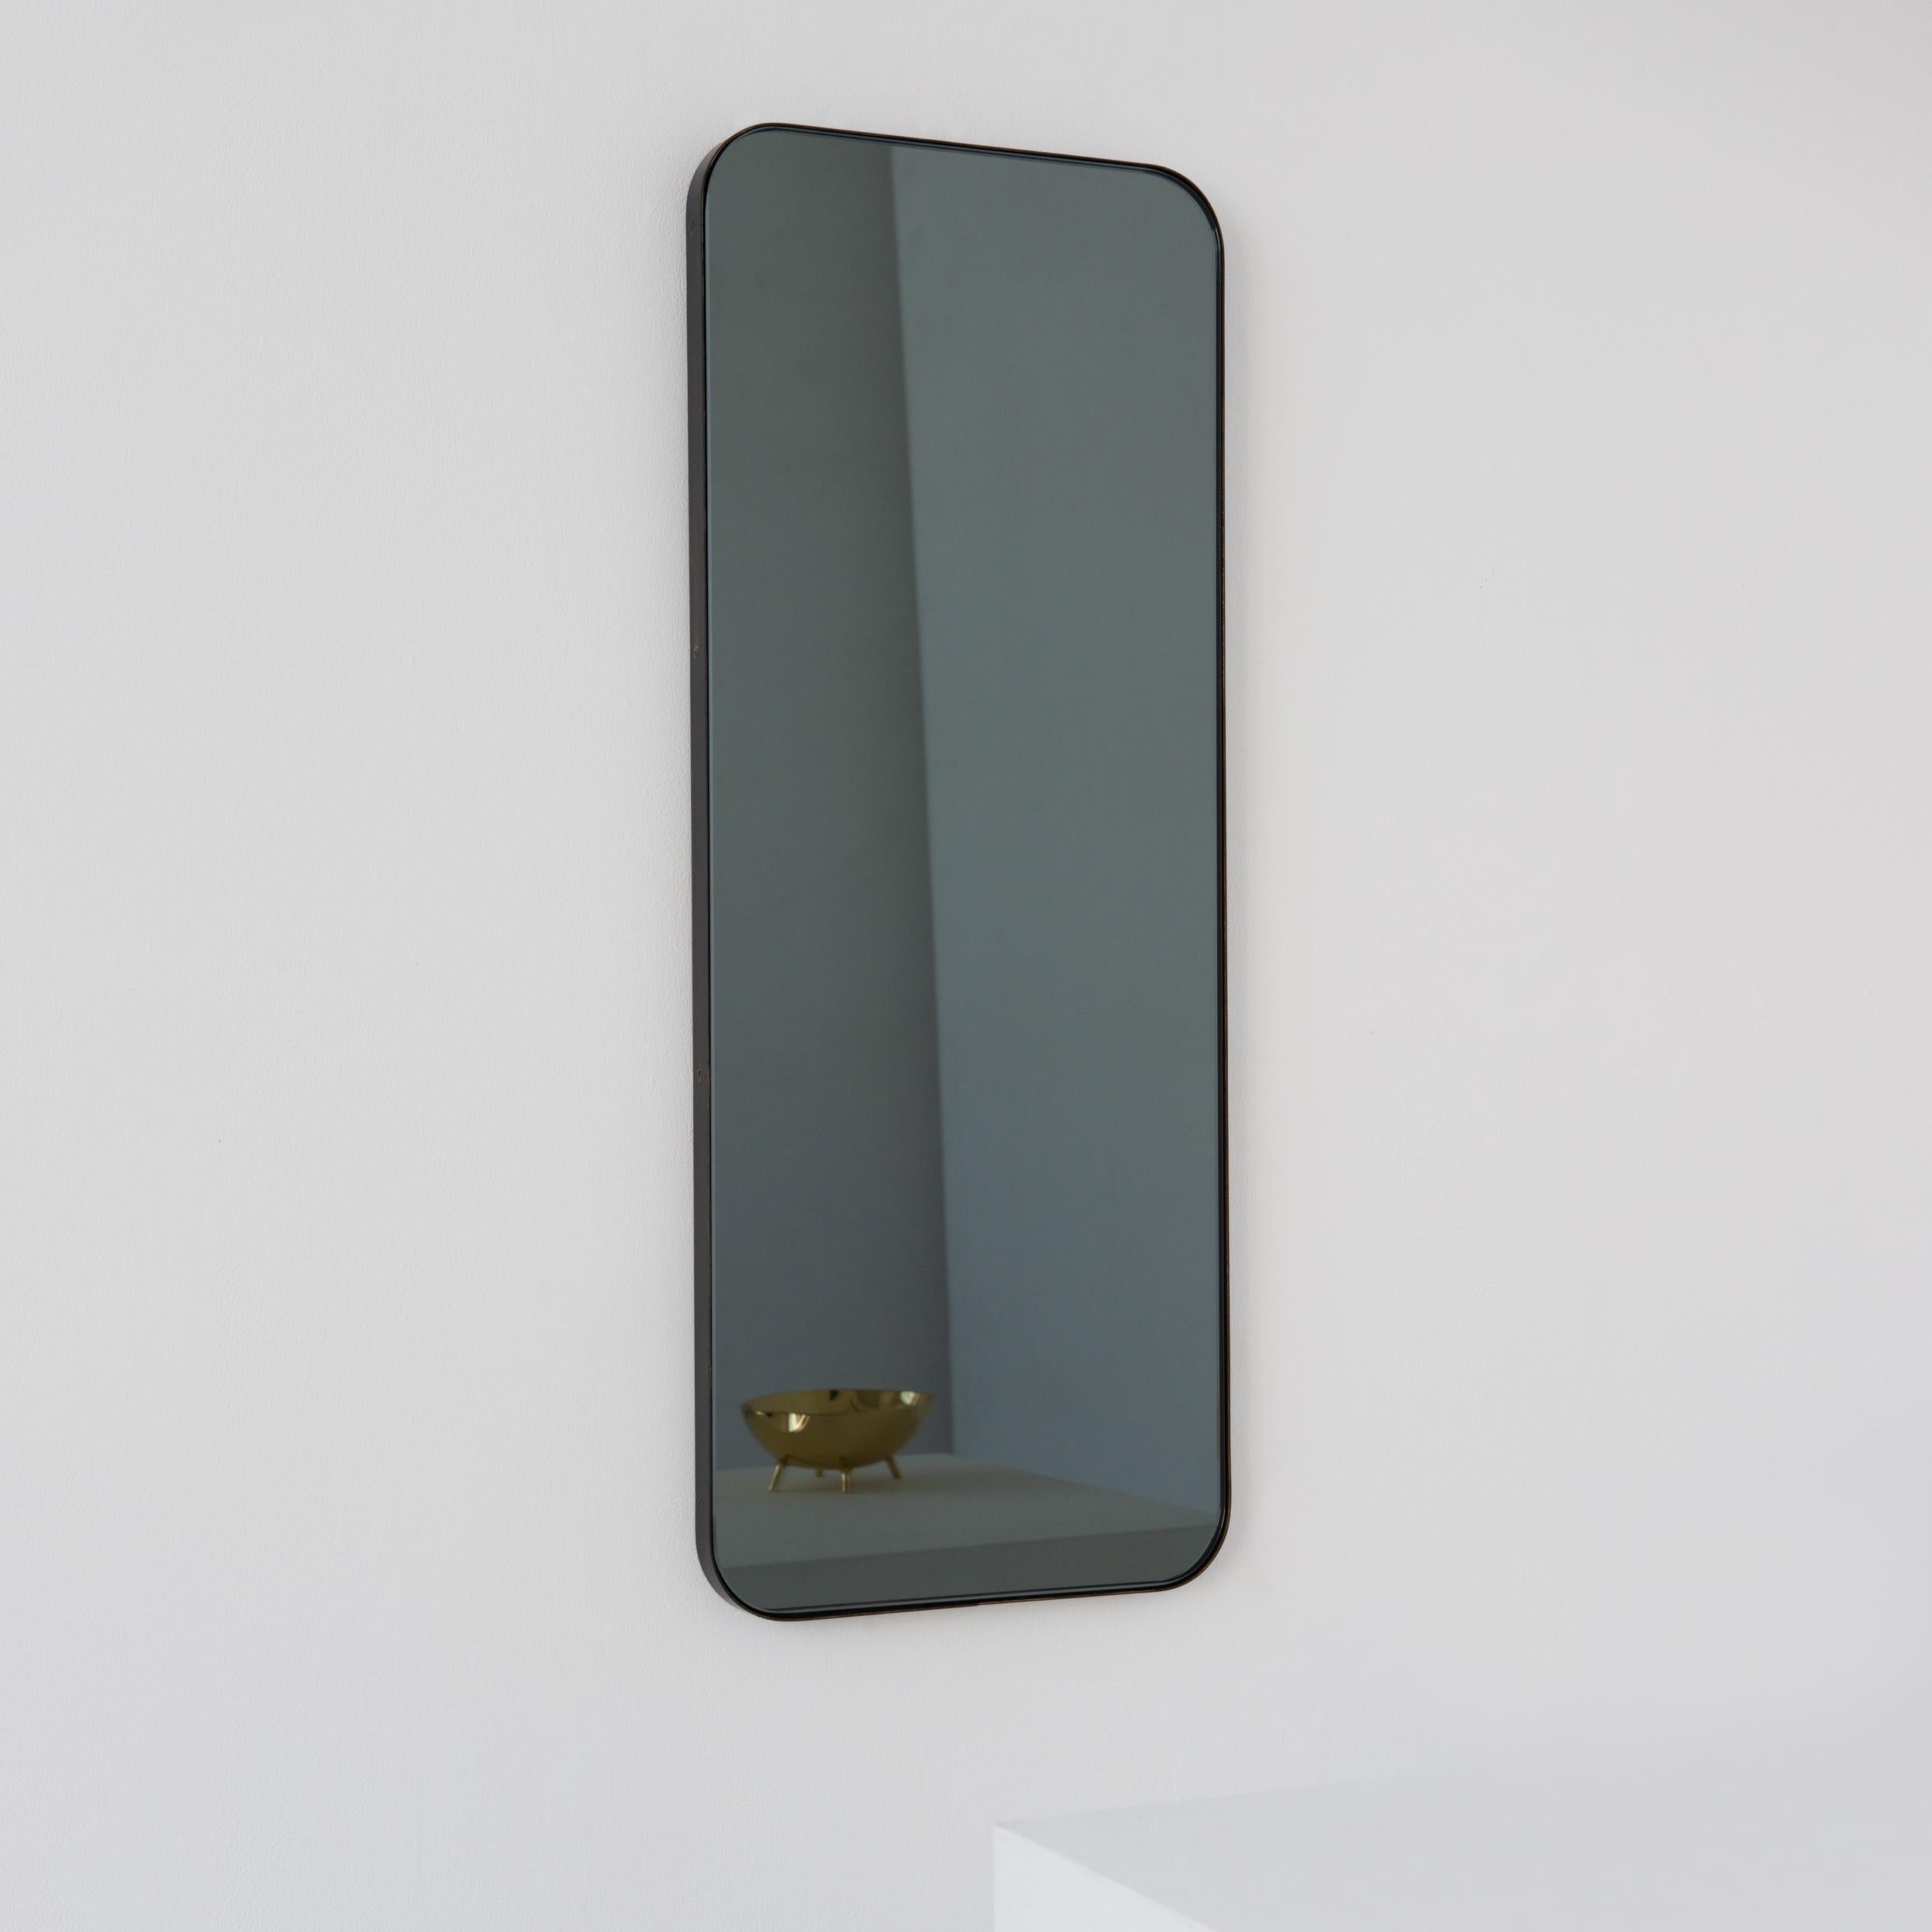 Quadris Black Tinted Rectangular Contemporary Mirror with a Black Frame, Large In New Condition For Sale In London, GB